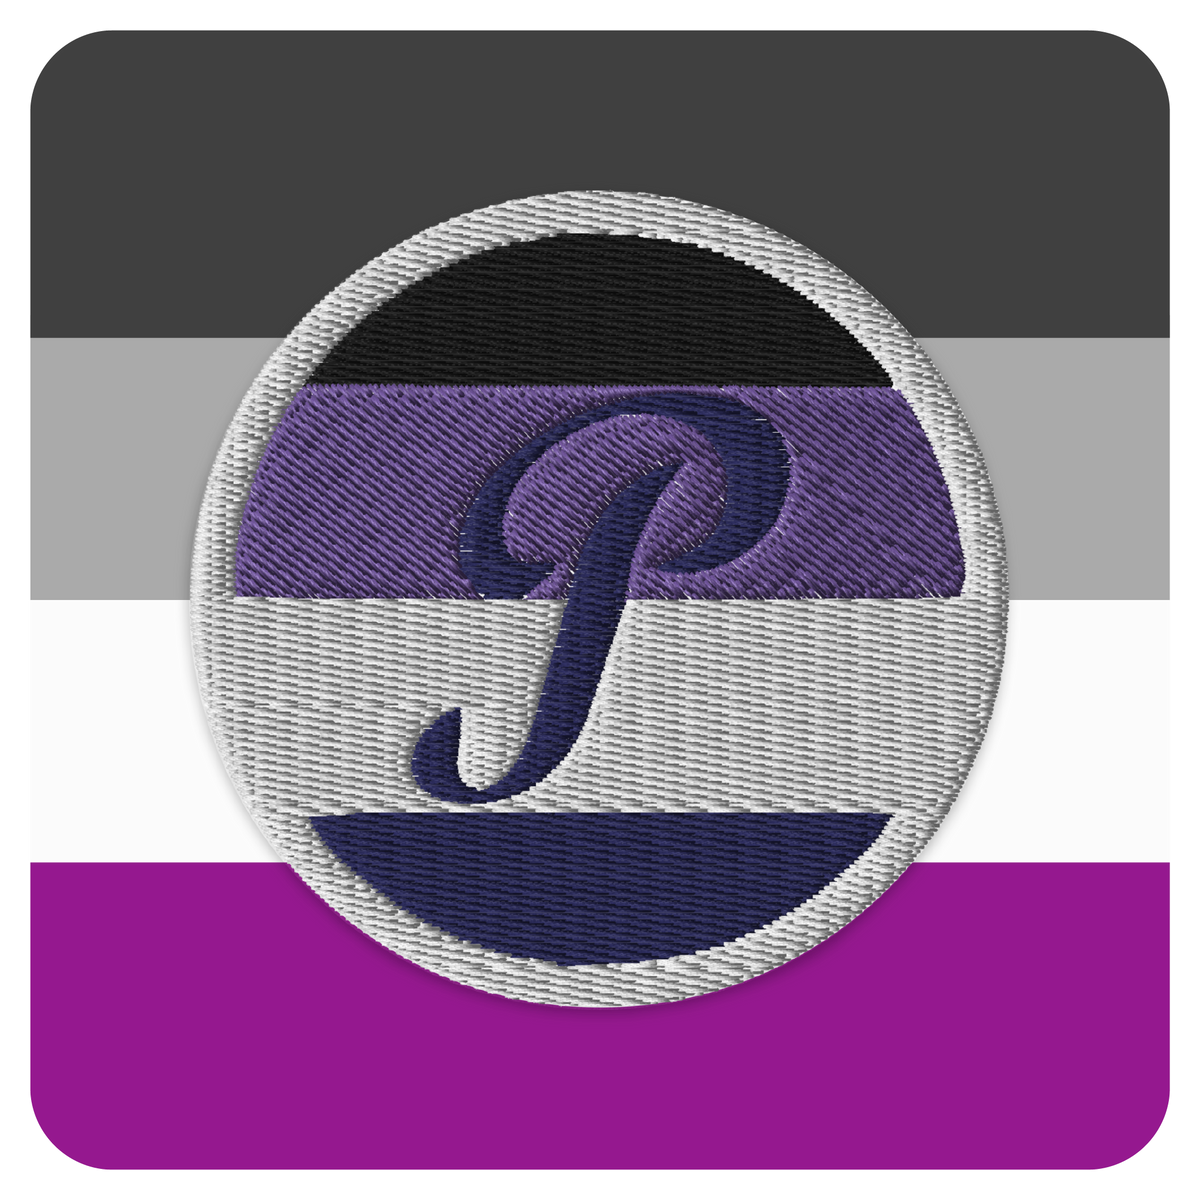 ASEXUAL PRIDE PATCH